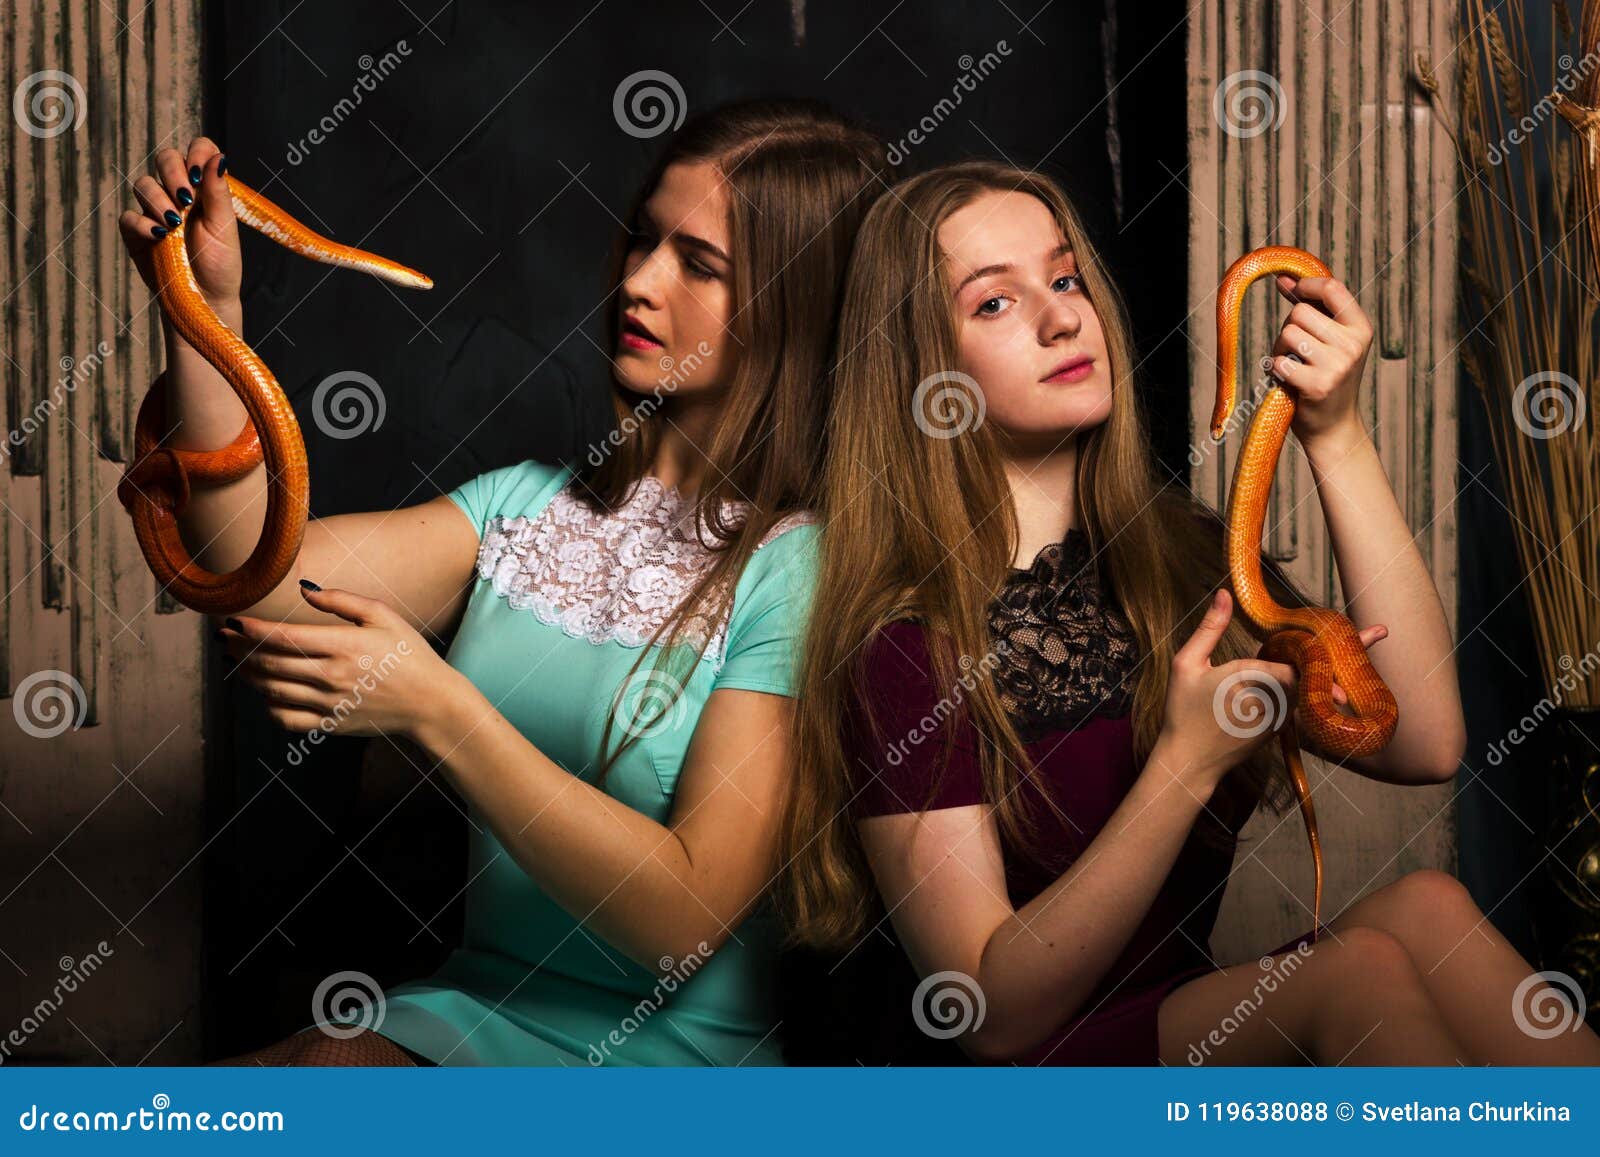 Snakes girl and Young Girl's